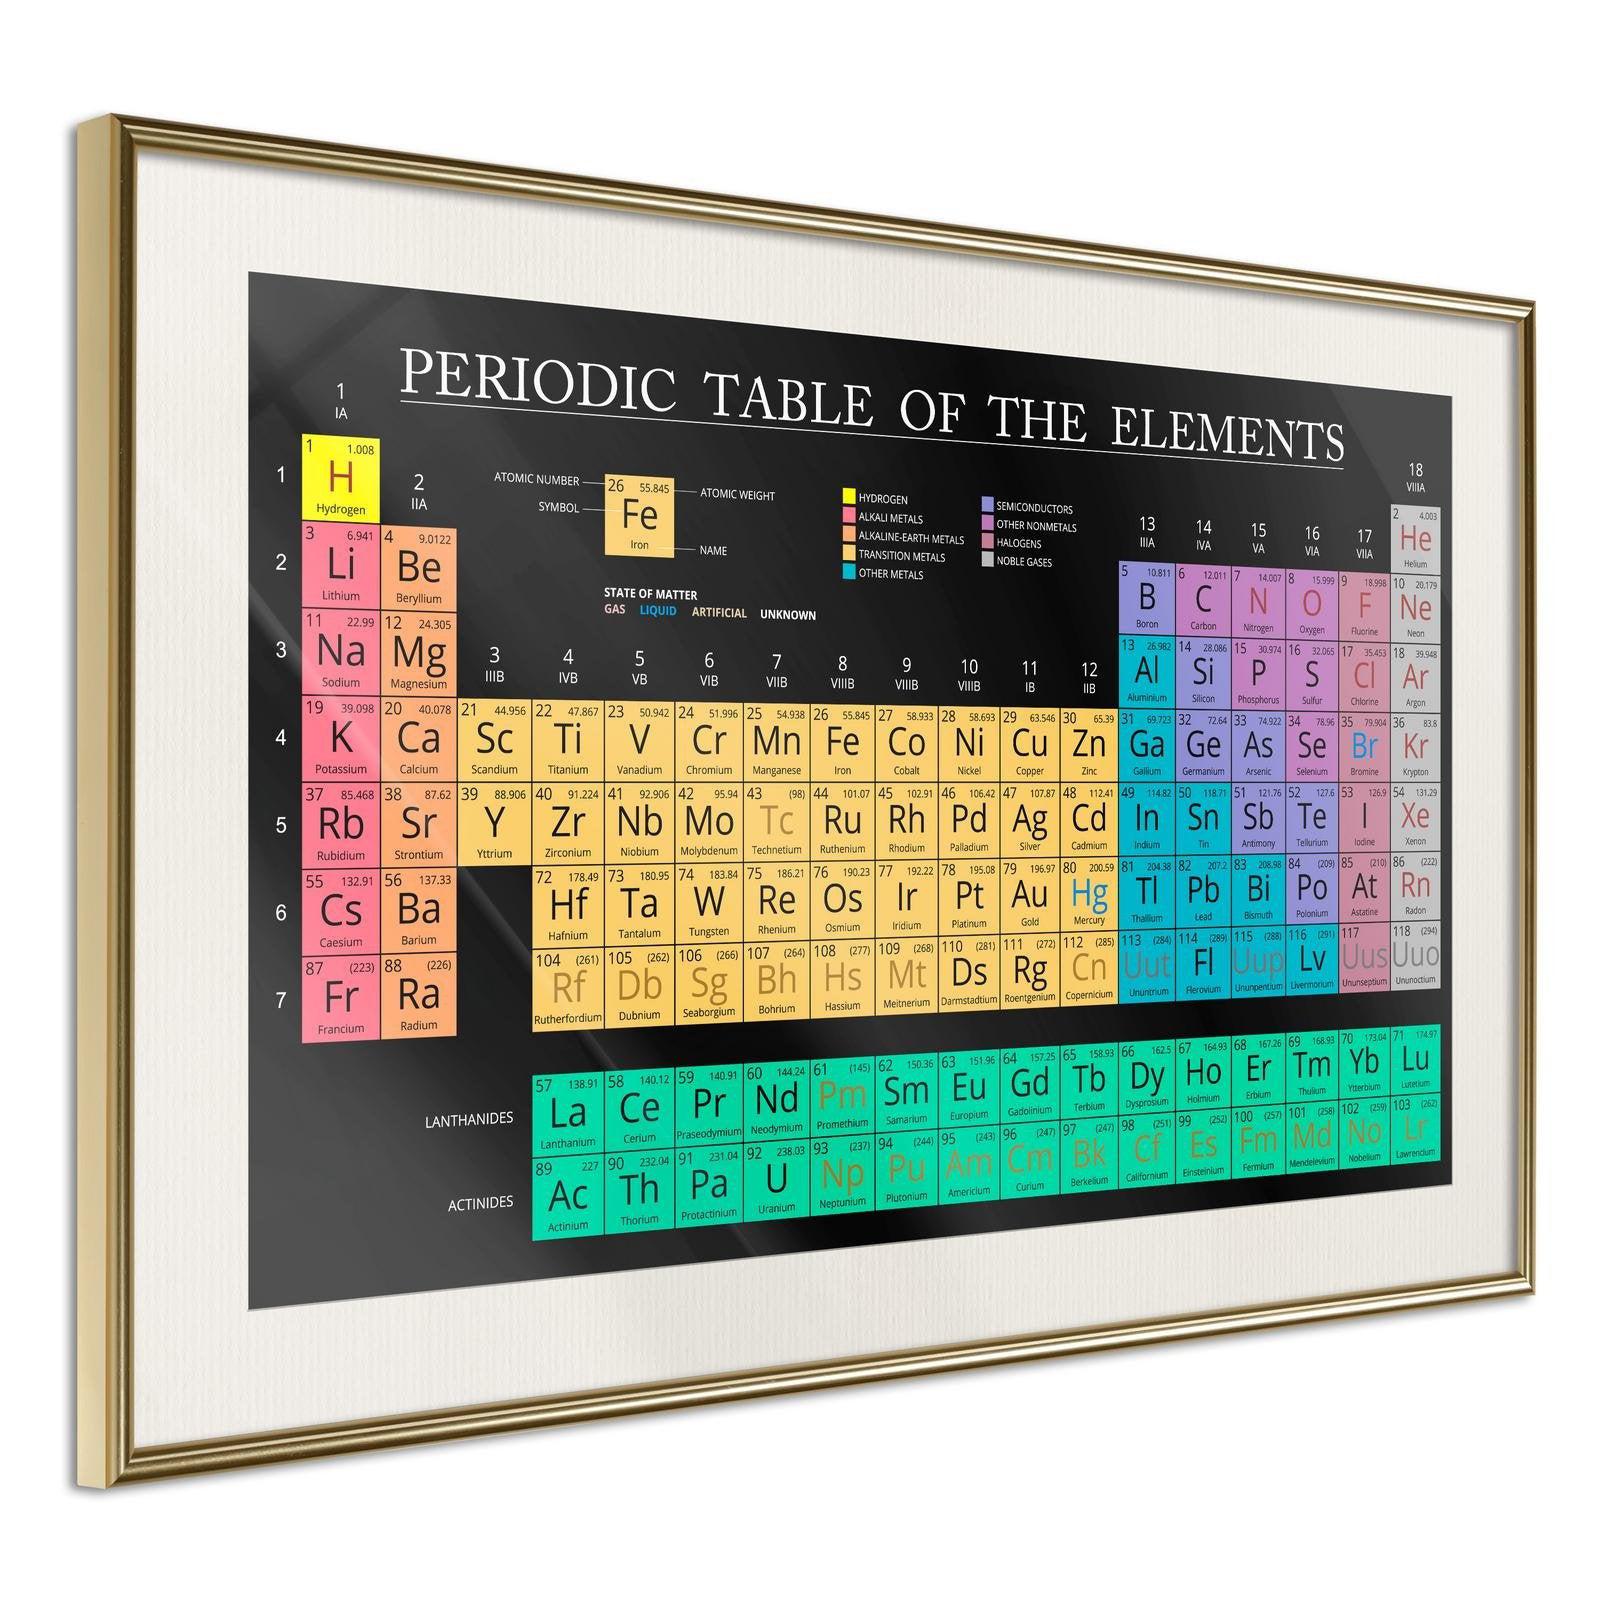 Inramad Poster / Tavla - Periodic Table of the Elements - 30x20 Guldram med passepartout